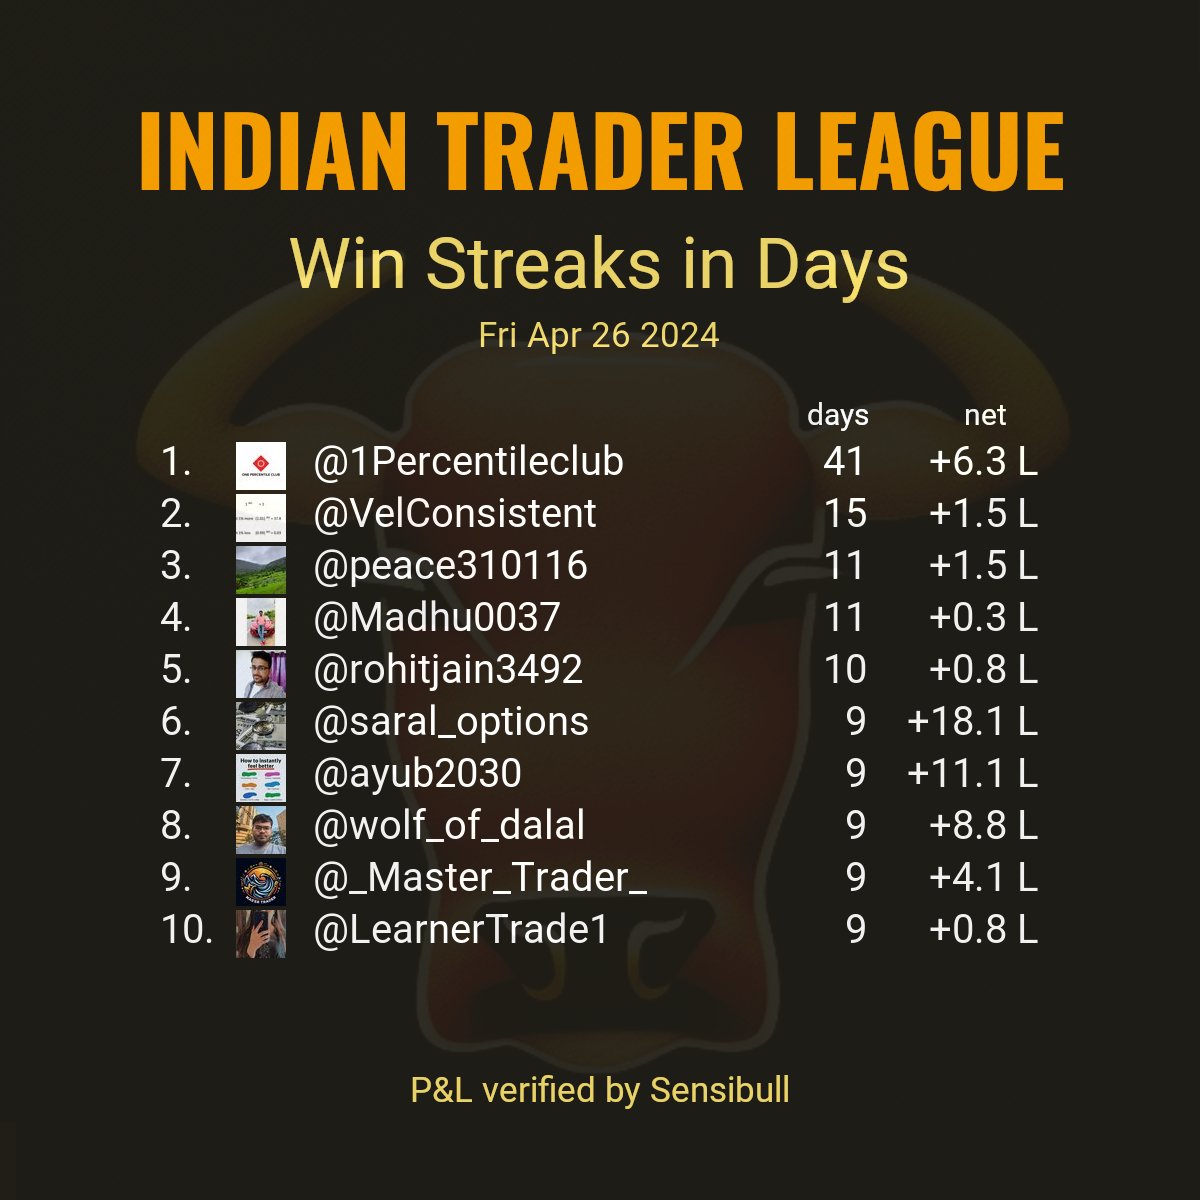 Top 10 longest win streaks reported by stock market participants as of trade date Fri Apr 26 2024. Criteria: Continuous days of #VerifiedBySensibull P&L with profit (>0.0). Sorted by number of days. Only realized P&L is considered.